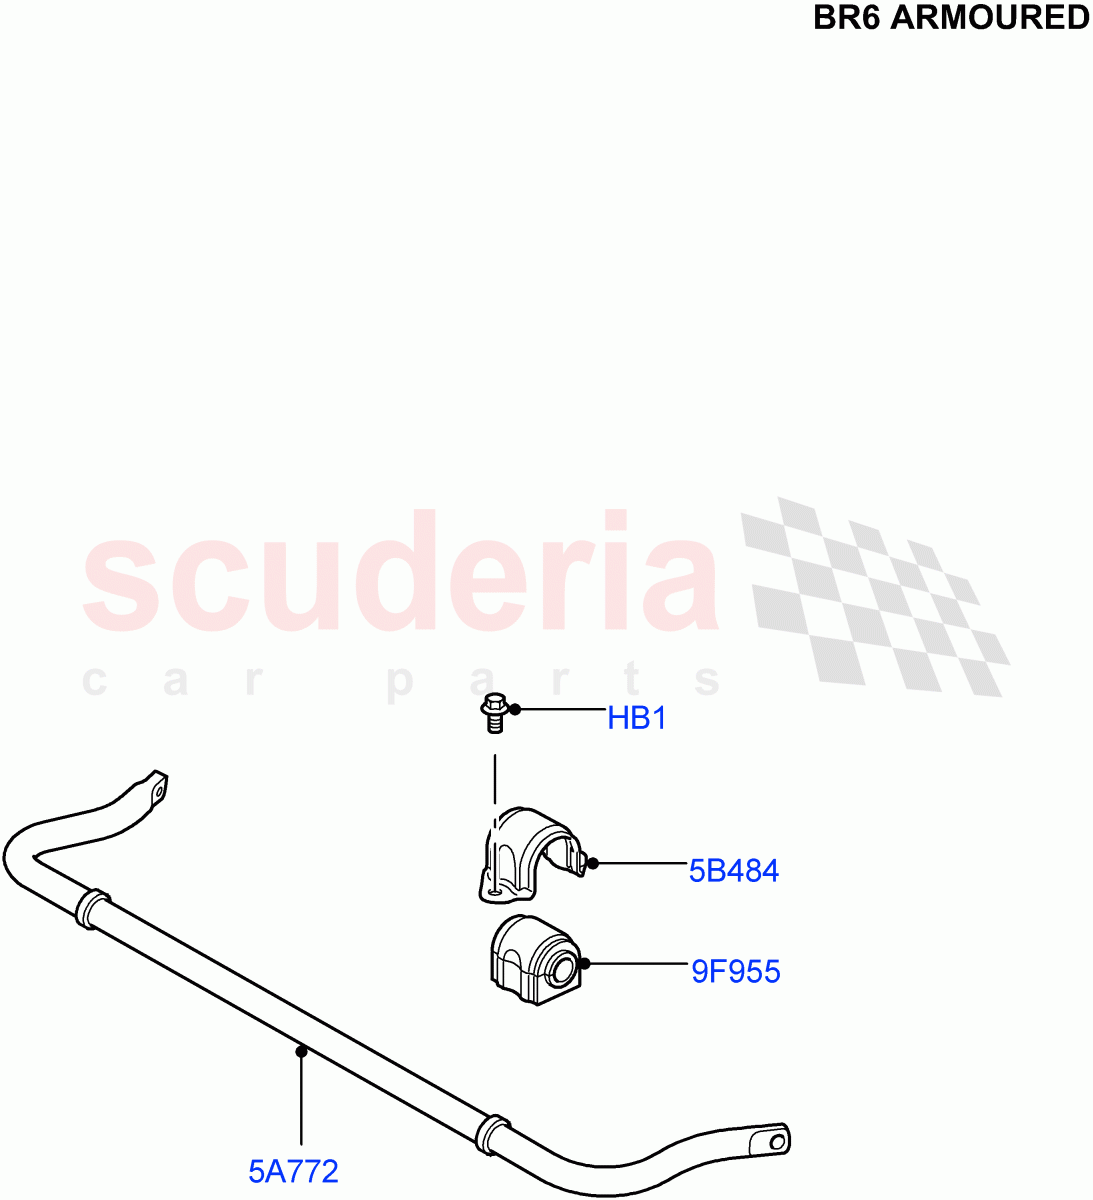 Rear Cross Member & Stabilizer Bar(With B6 Level Armouring)((V)FROMAA000001) of Land Rover Land Rover Discovery 4 (2010-2016) [2.7 Diesel V6]